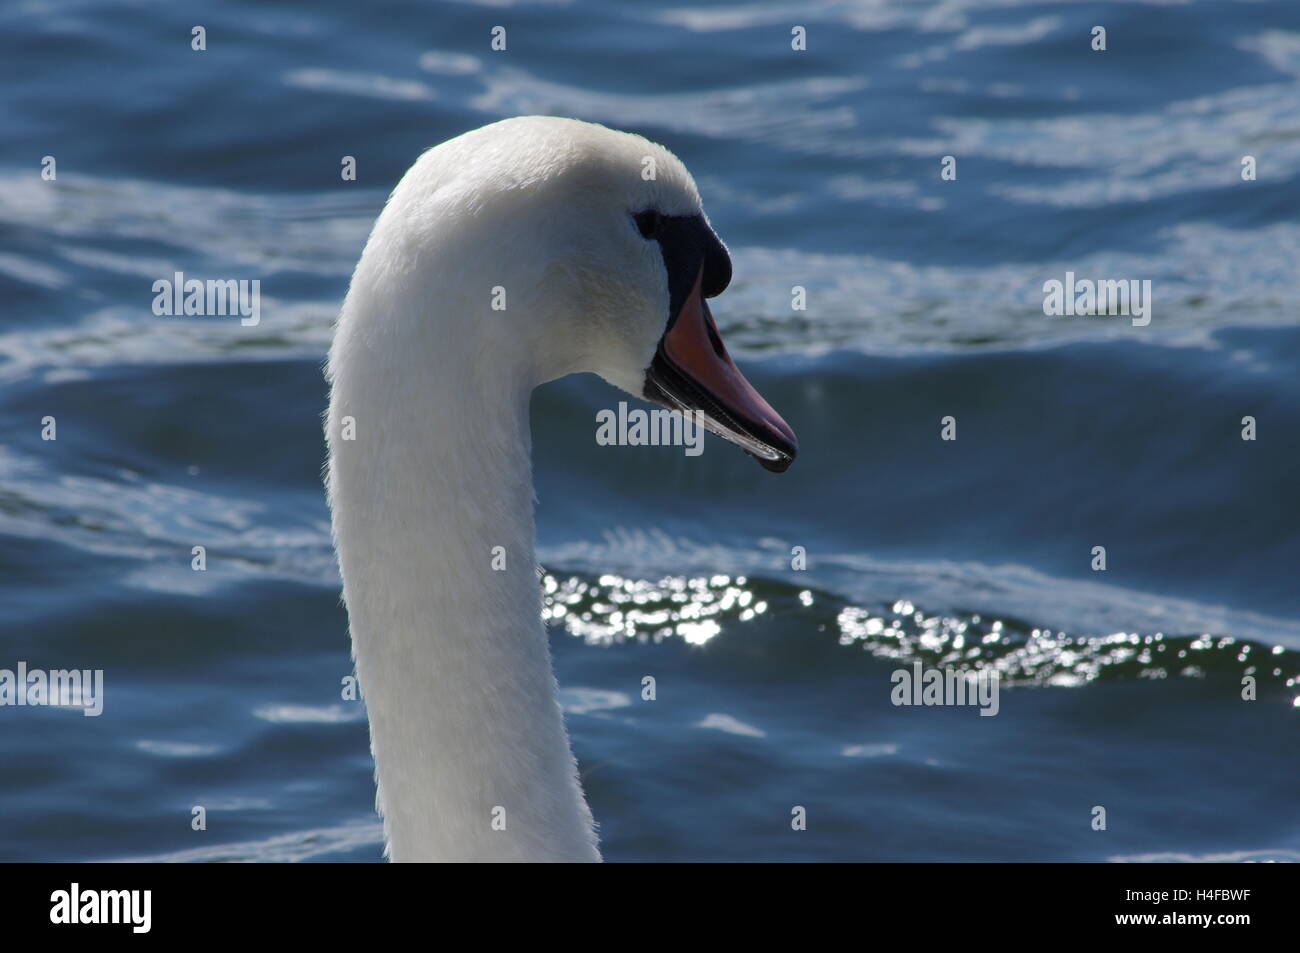 Closeup of the head of a swan against a backdrop of deep blue water taken in bright sunlight. Stock Photo